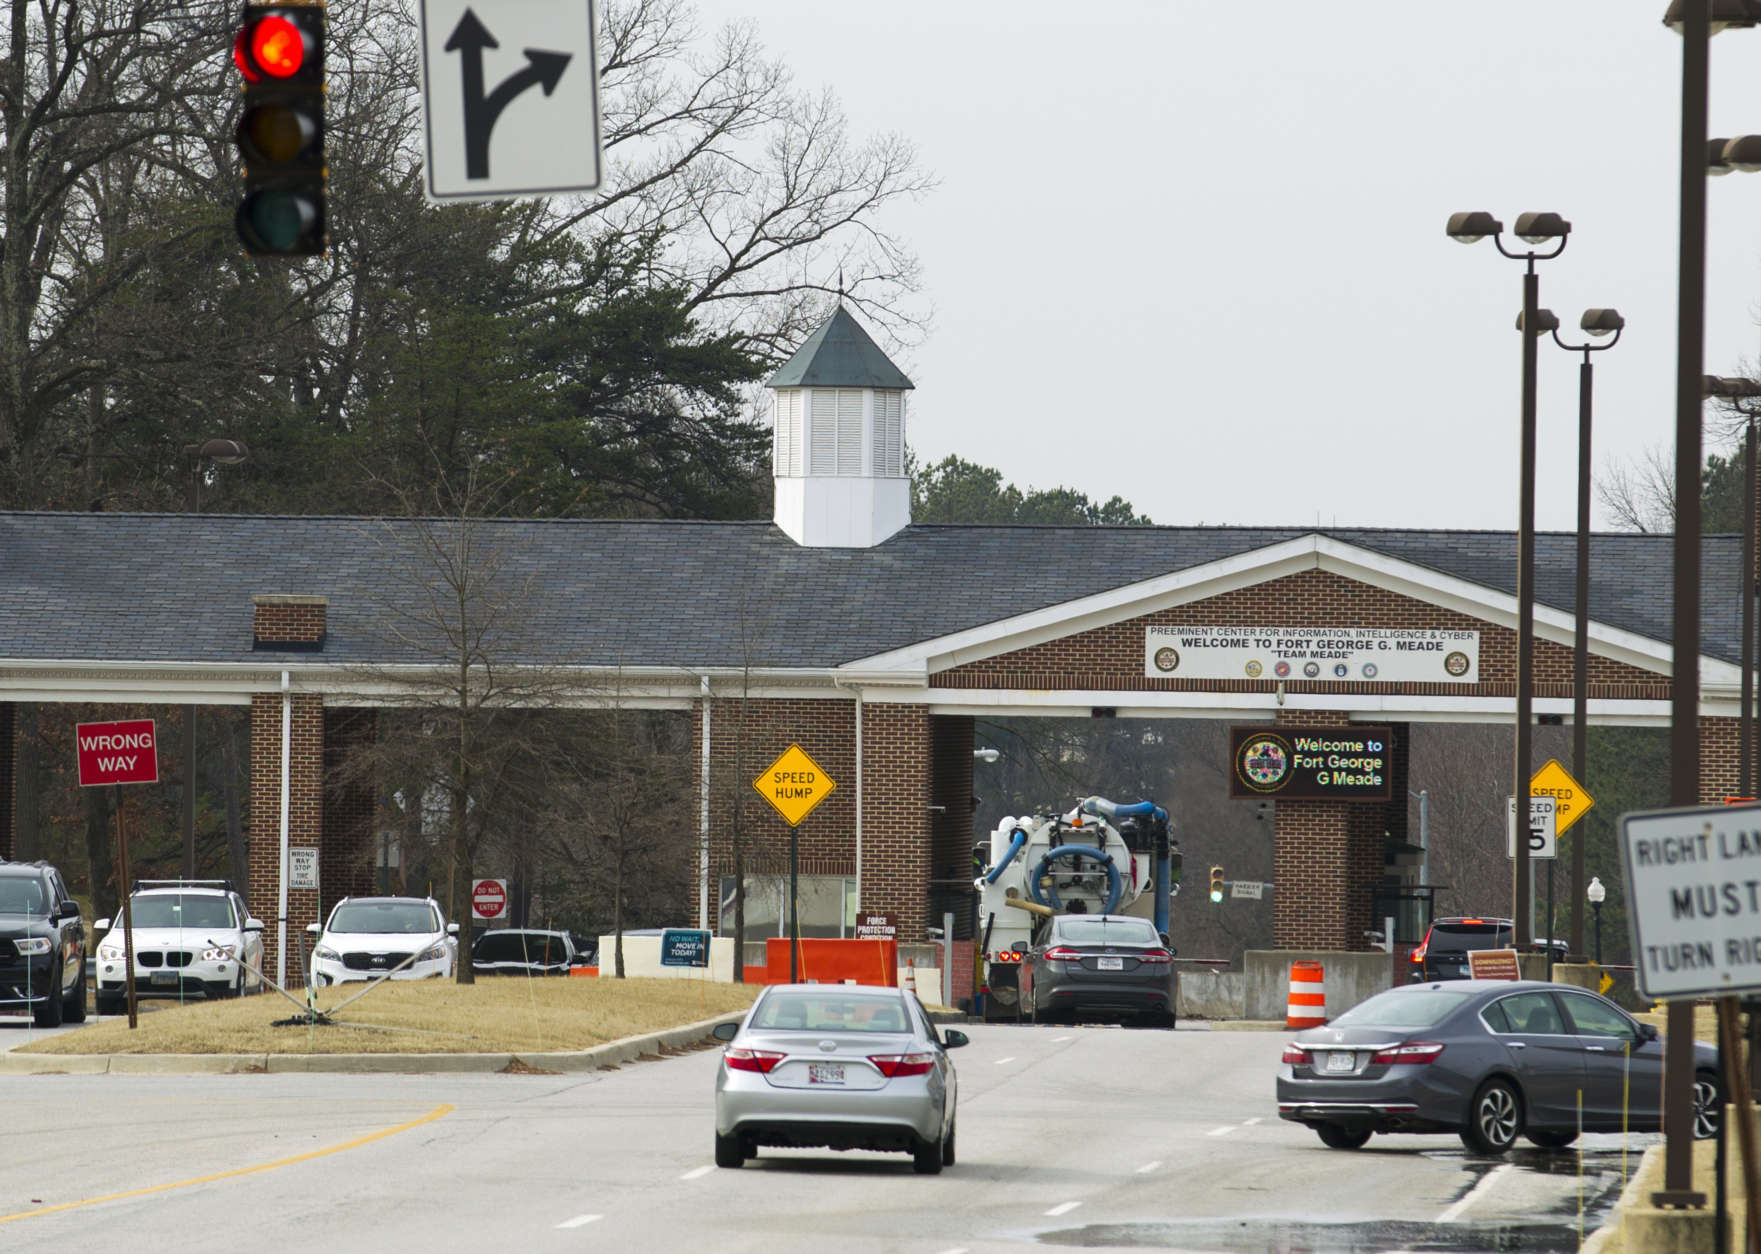 Fort Meade gate next to the The National Security Agency is seen Wednesday, Feb. 14, 2018, in Fort Meade, Md. One person was wounded in a shooting Wednesday morning outside the National Security Agency campus at Fort Meade. (AP Photo/Jose Luis Magana)